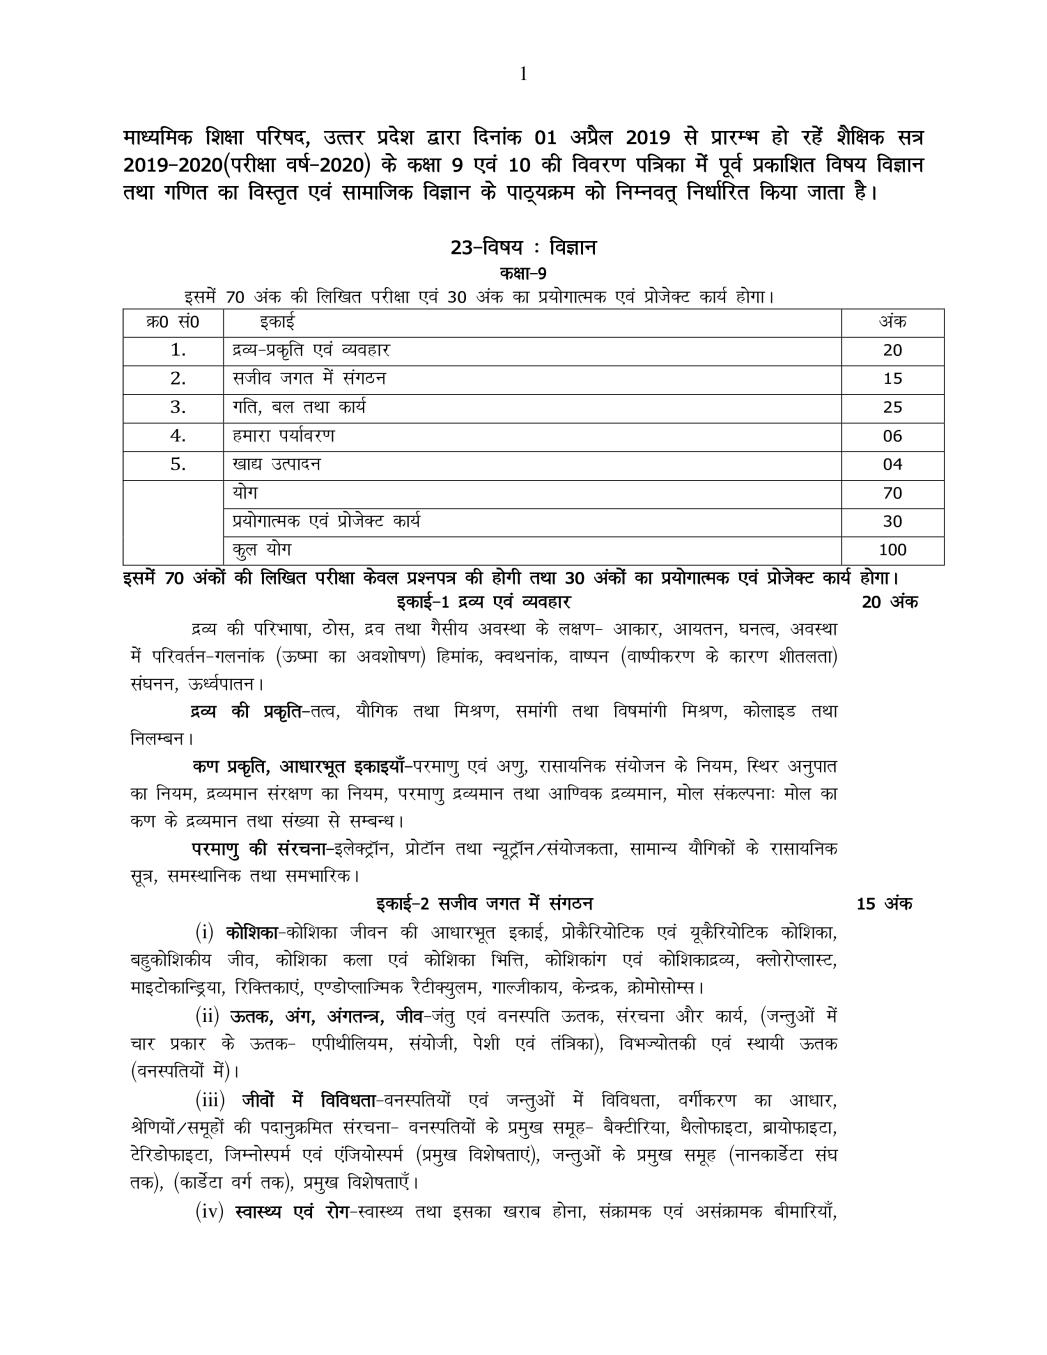 UP Board Syllabus for Class 9th - Page 1